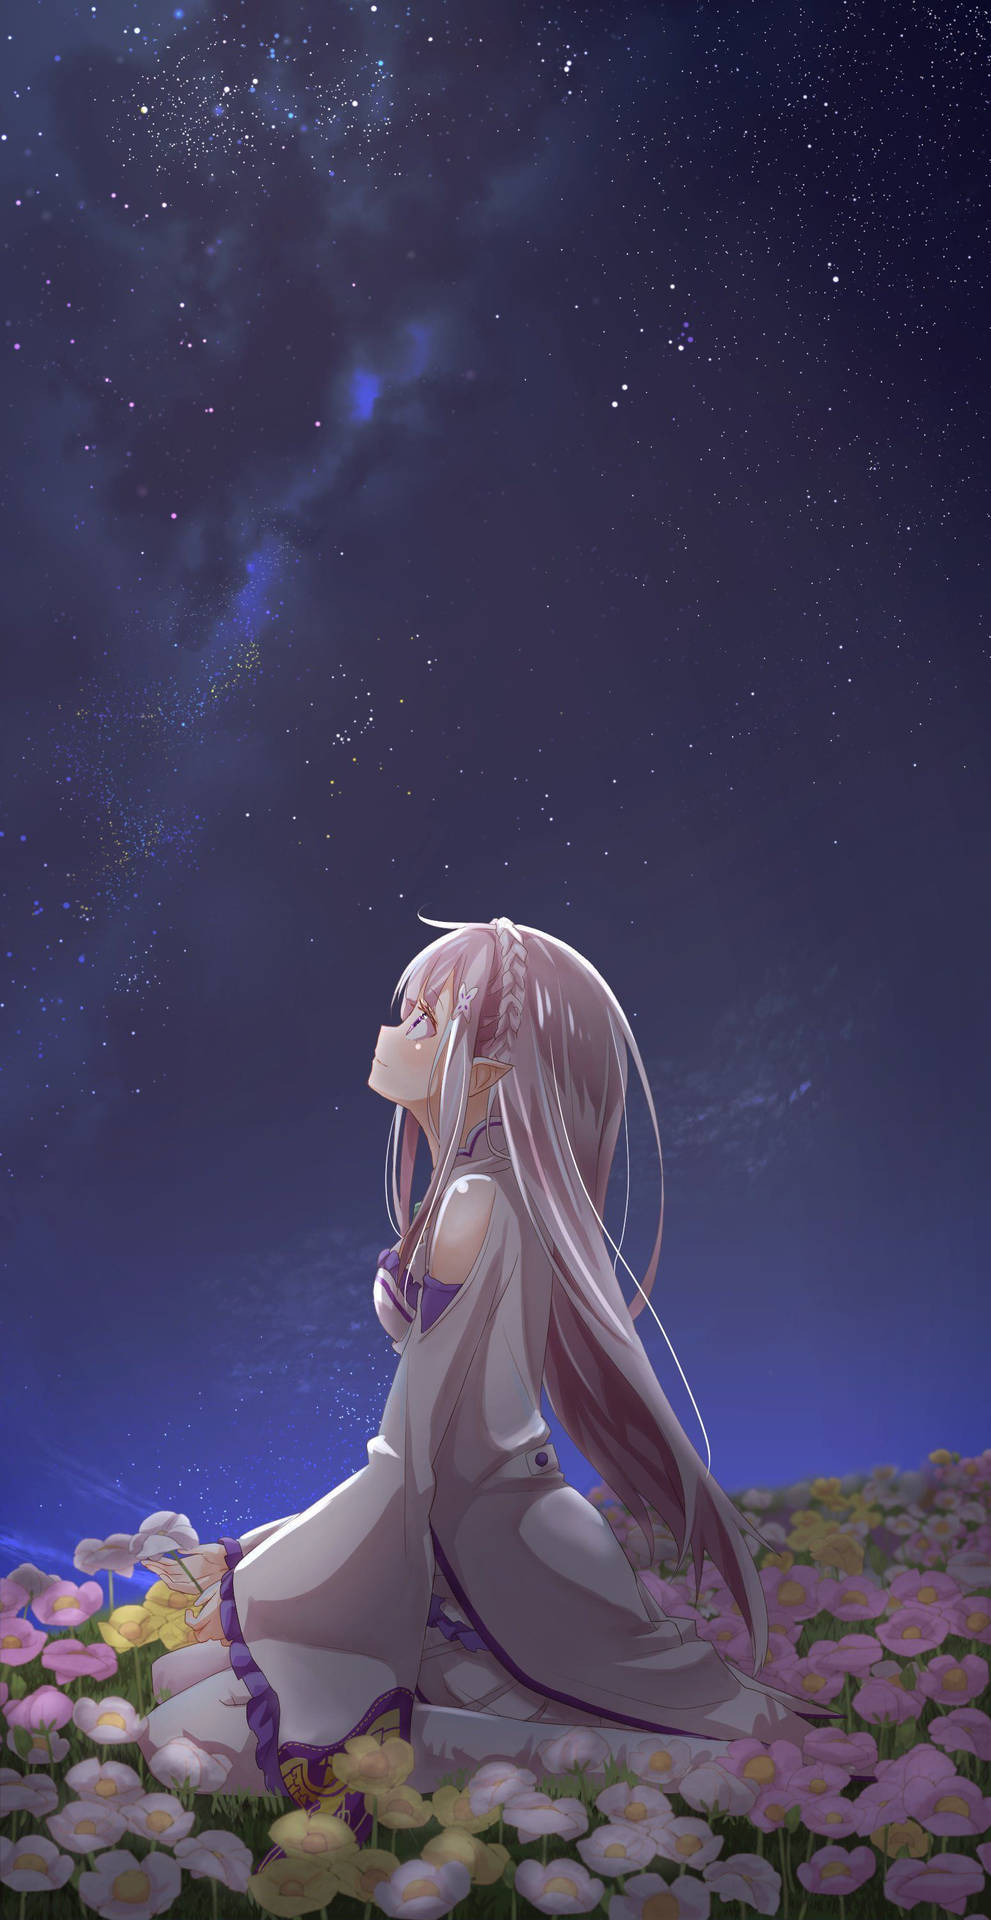 Deeply Moving Sad Anime Profile Picture Wallpaper